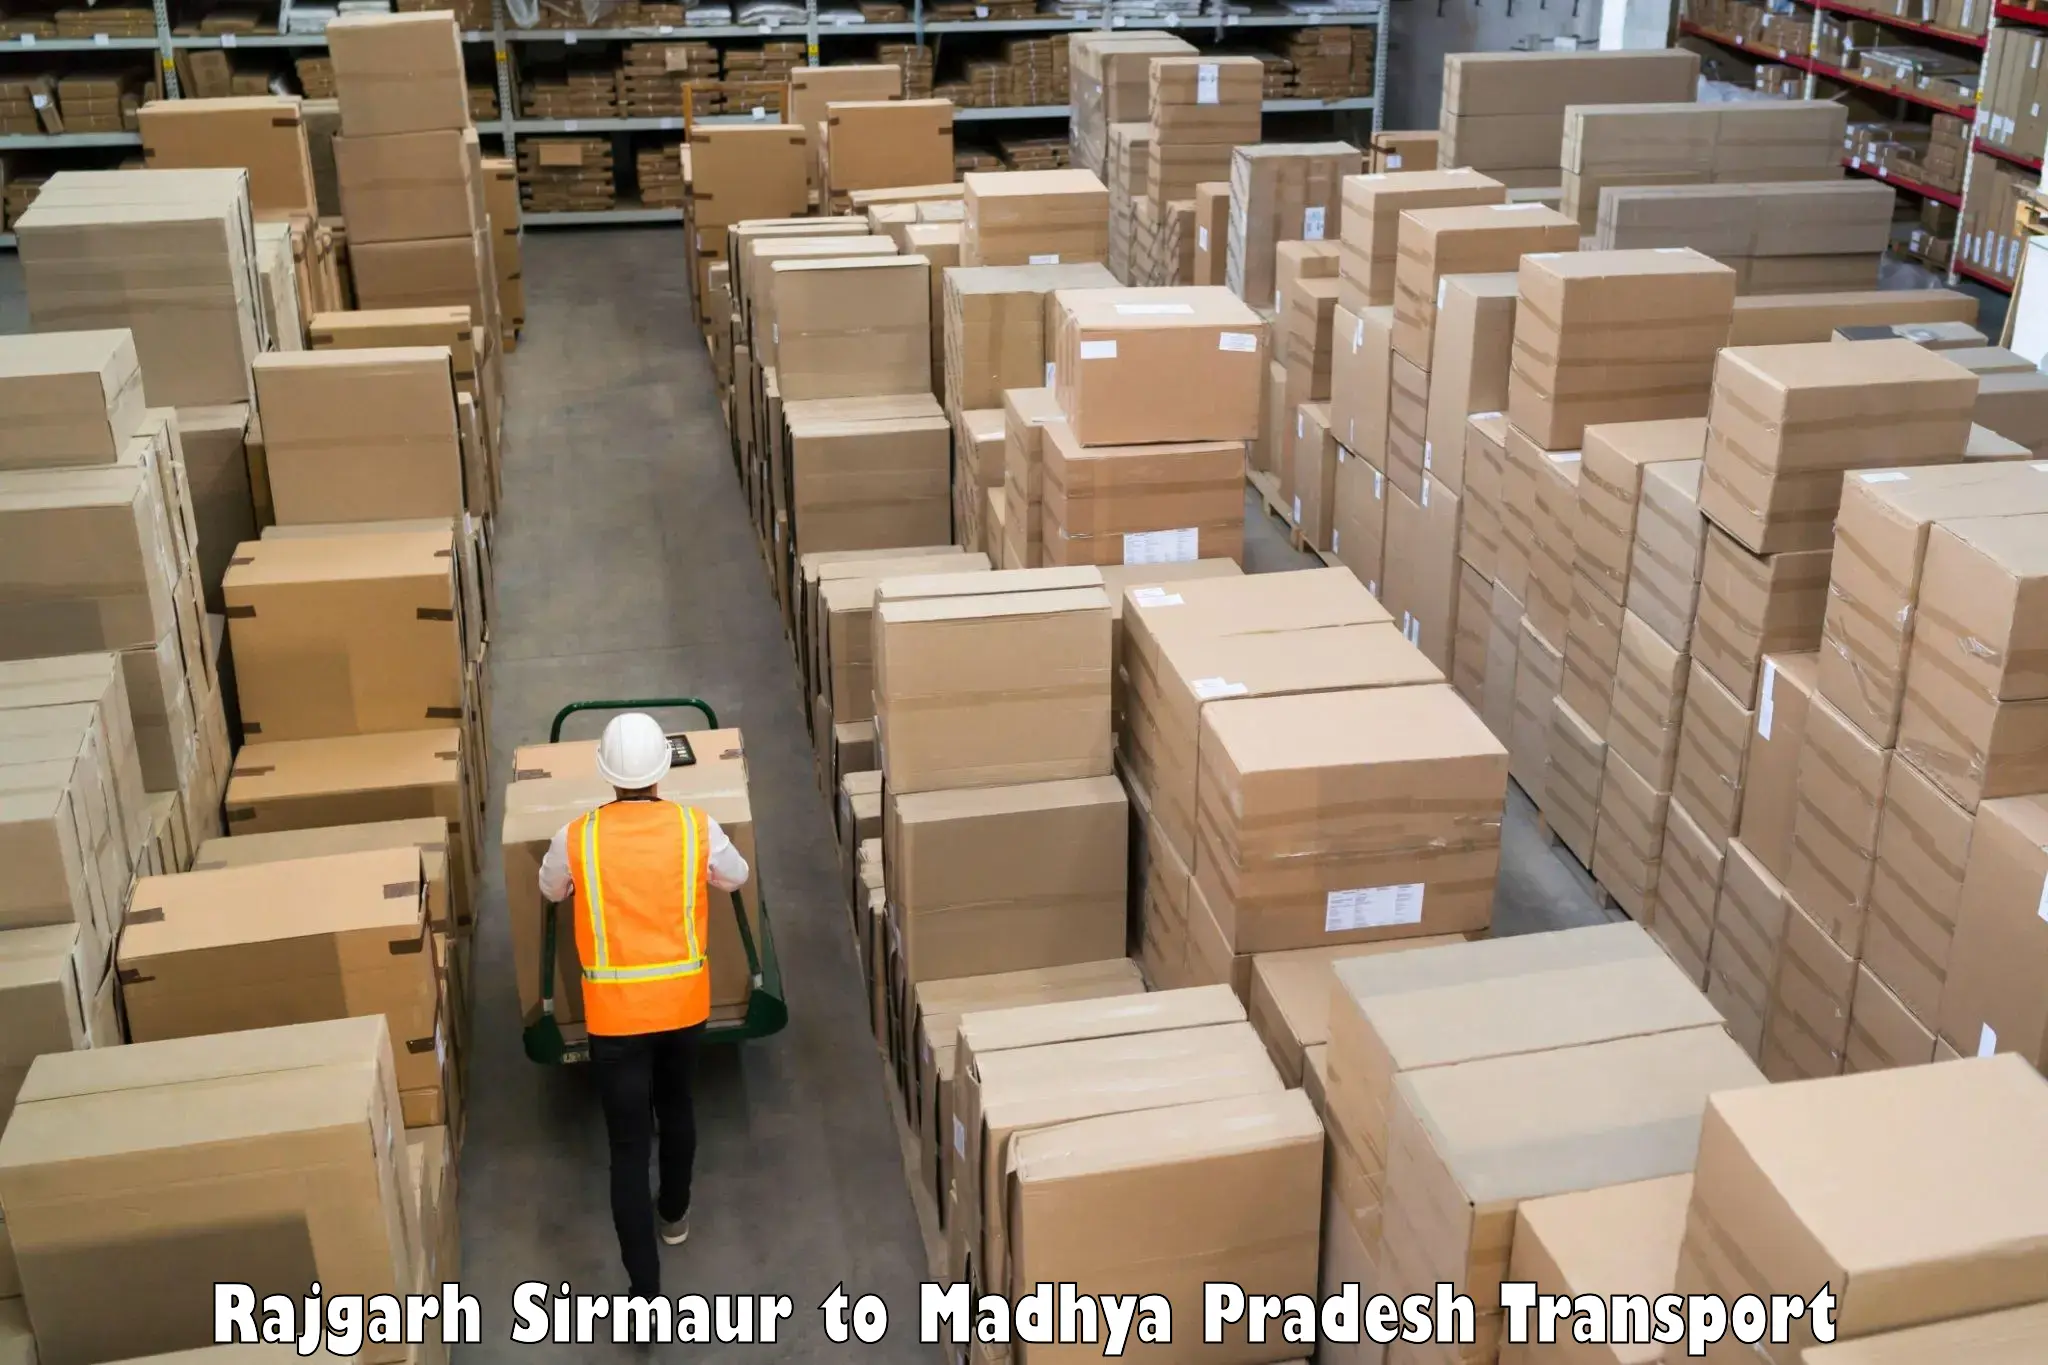 Air freight transport services Rajgarh Sirmaur to IIIT Bhopal